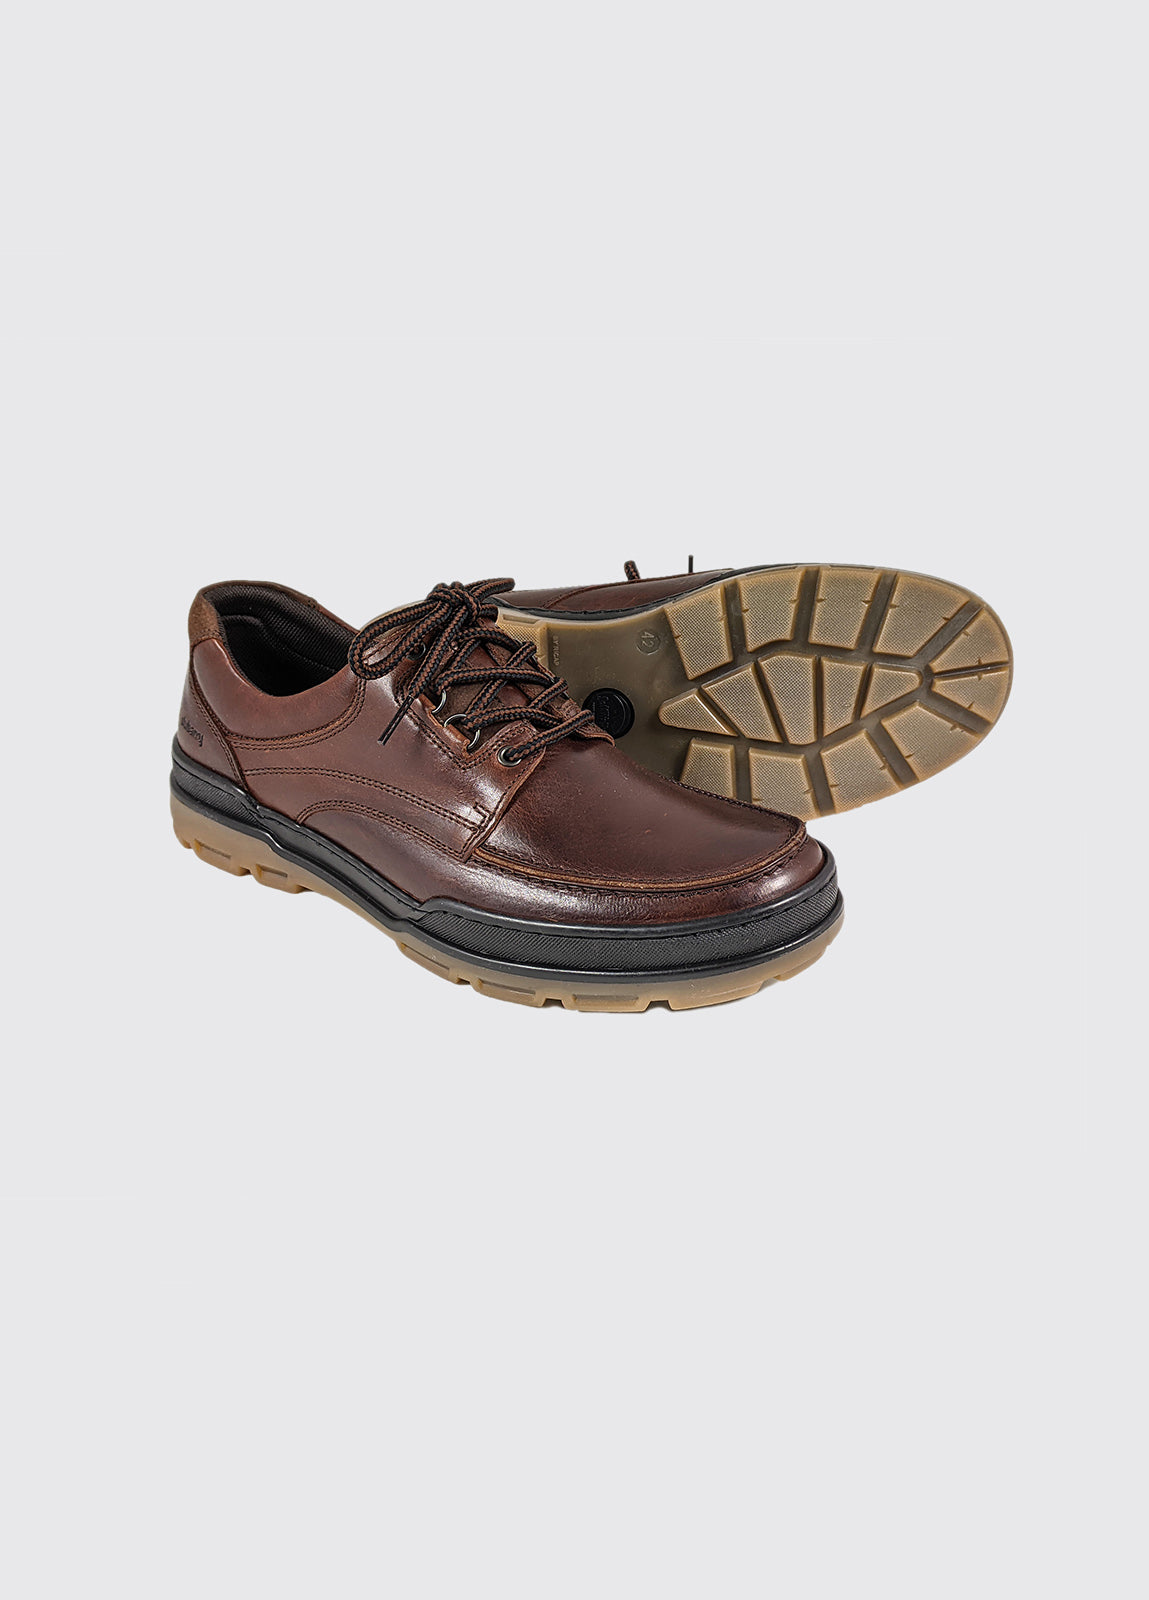 Barny Chestnut Wide Fit Dubarry Shoe Side view  and sole